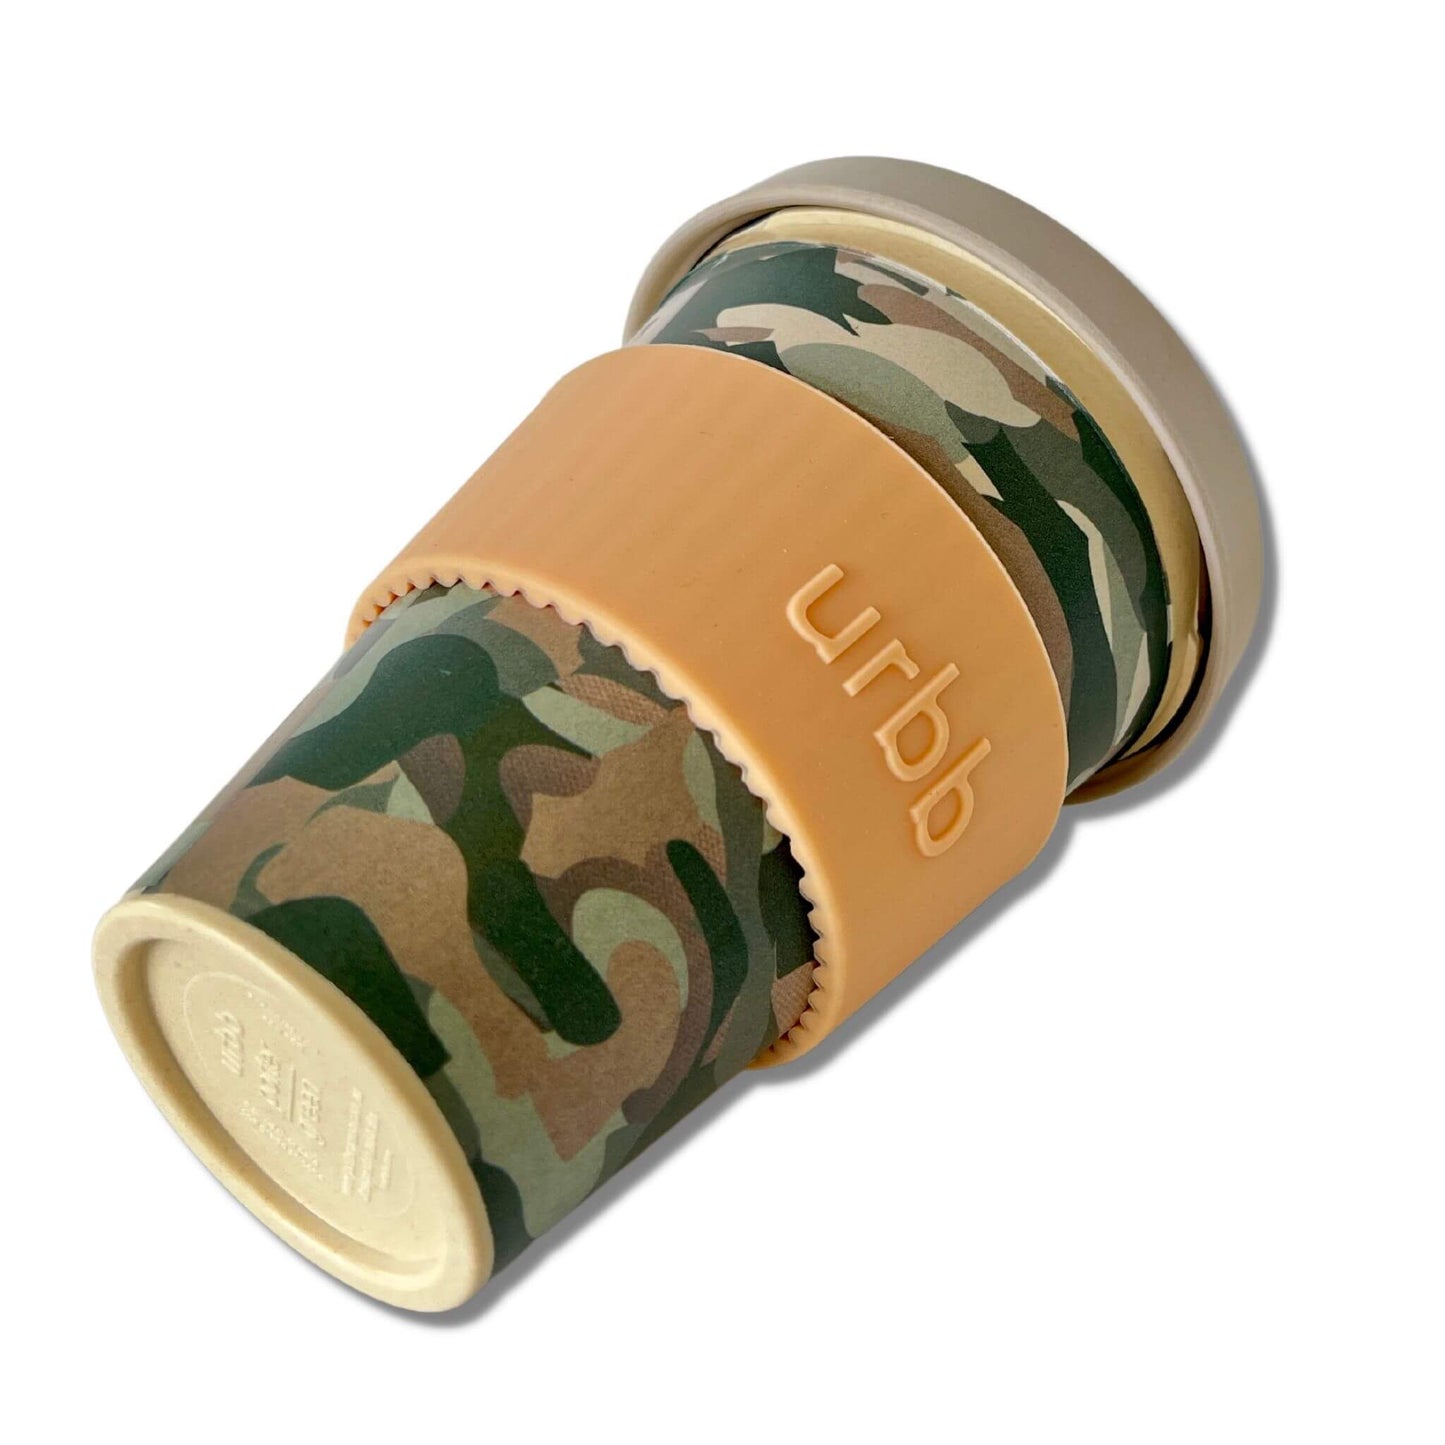 porter green urbb biodegradable coffee cup  - design is camouflage